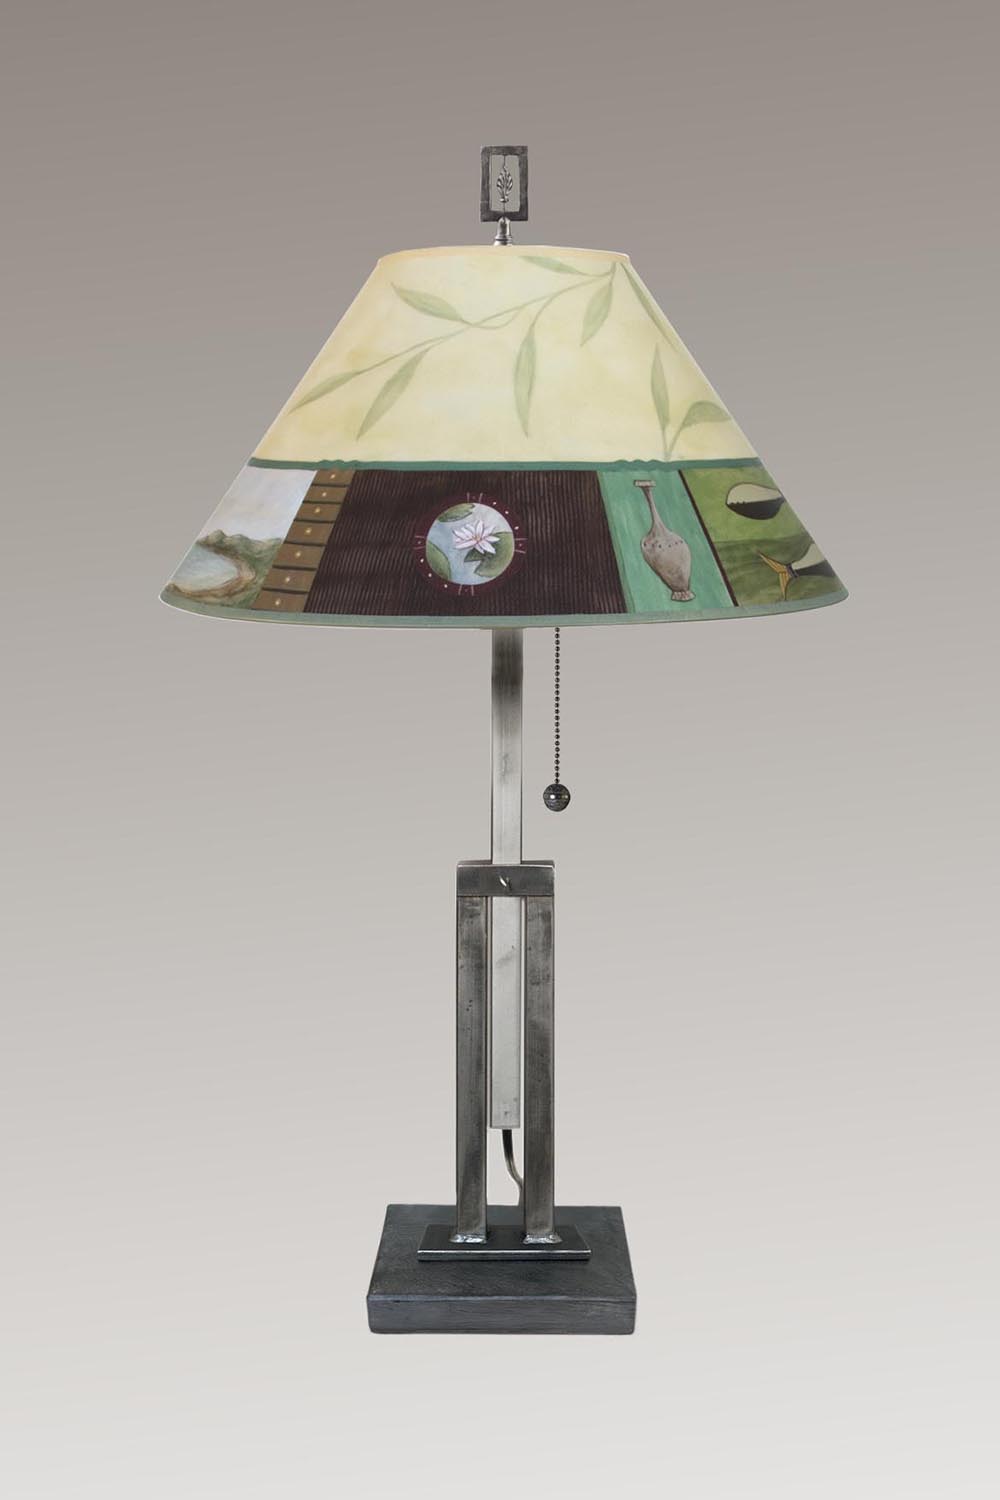 Adjustable-Height Steel Table Lamp with Large Conical Shade in Twin Fish